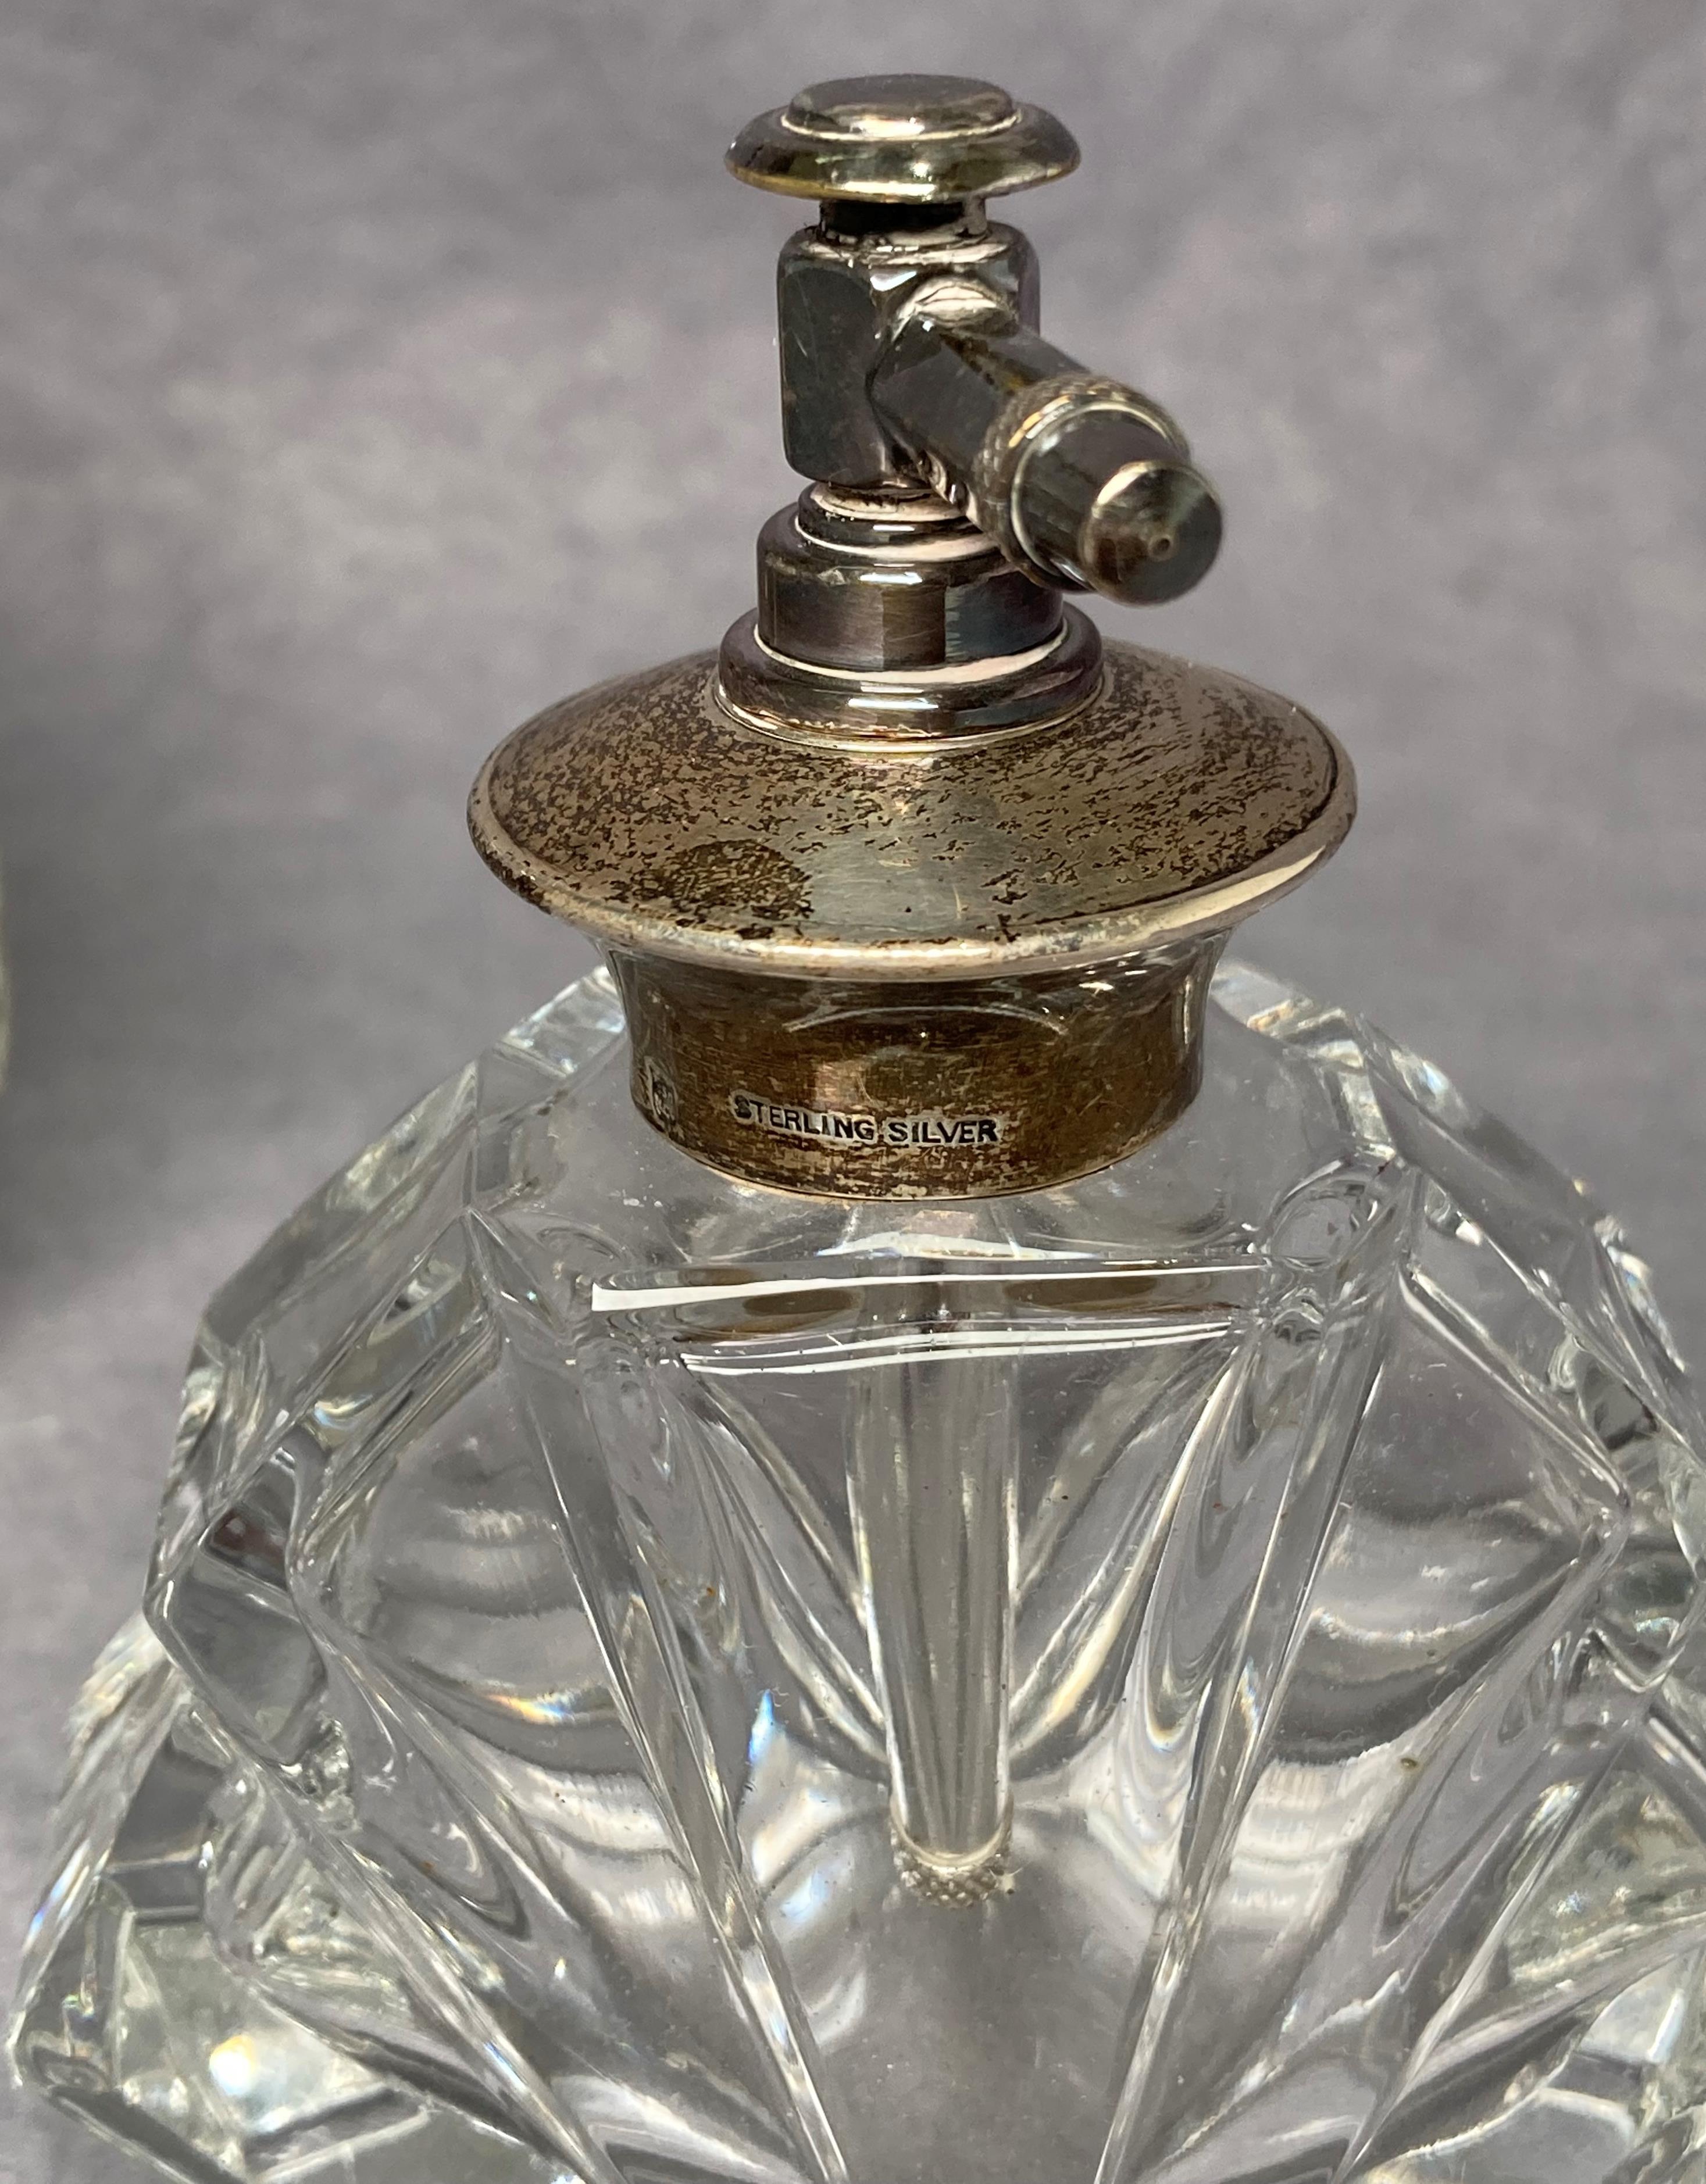 Two vintage perfume crystal/glass bottles with Sterling Silver tops/pumps (9cm and 14cm high) and a - Image 4 of 5